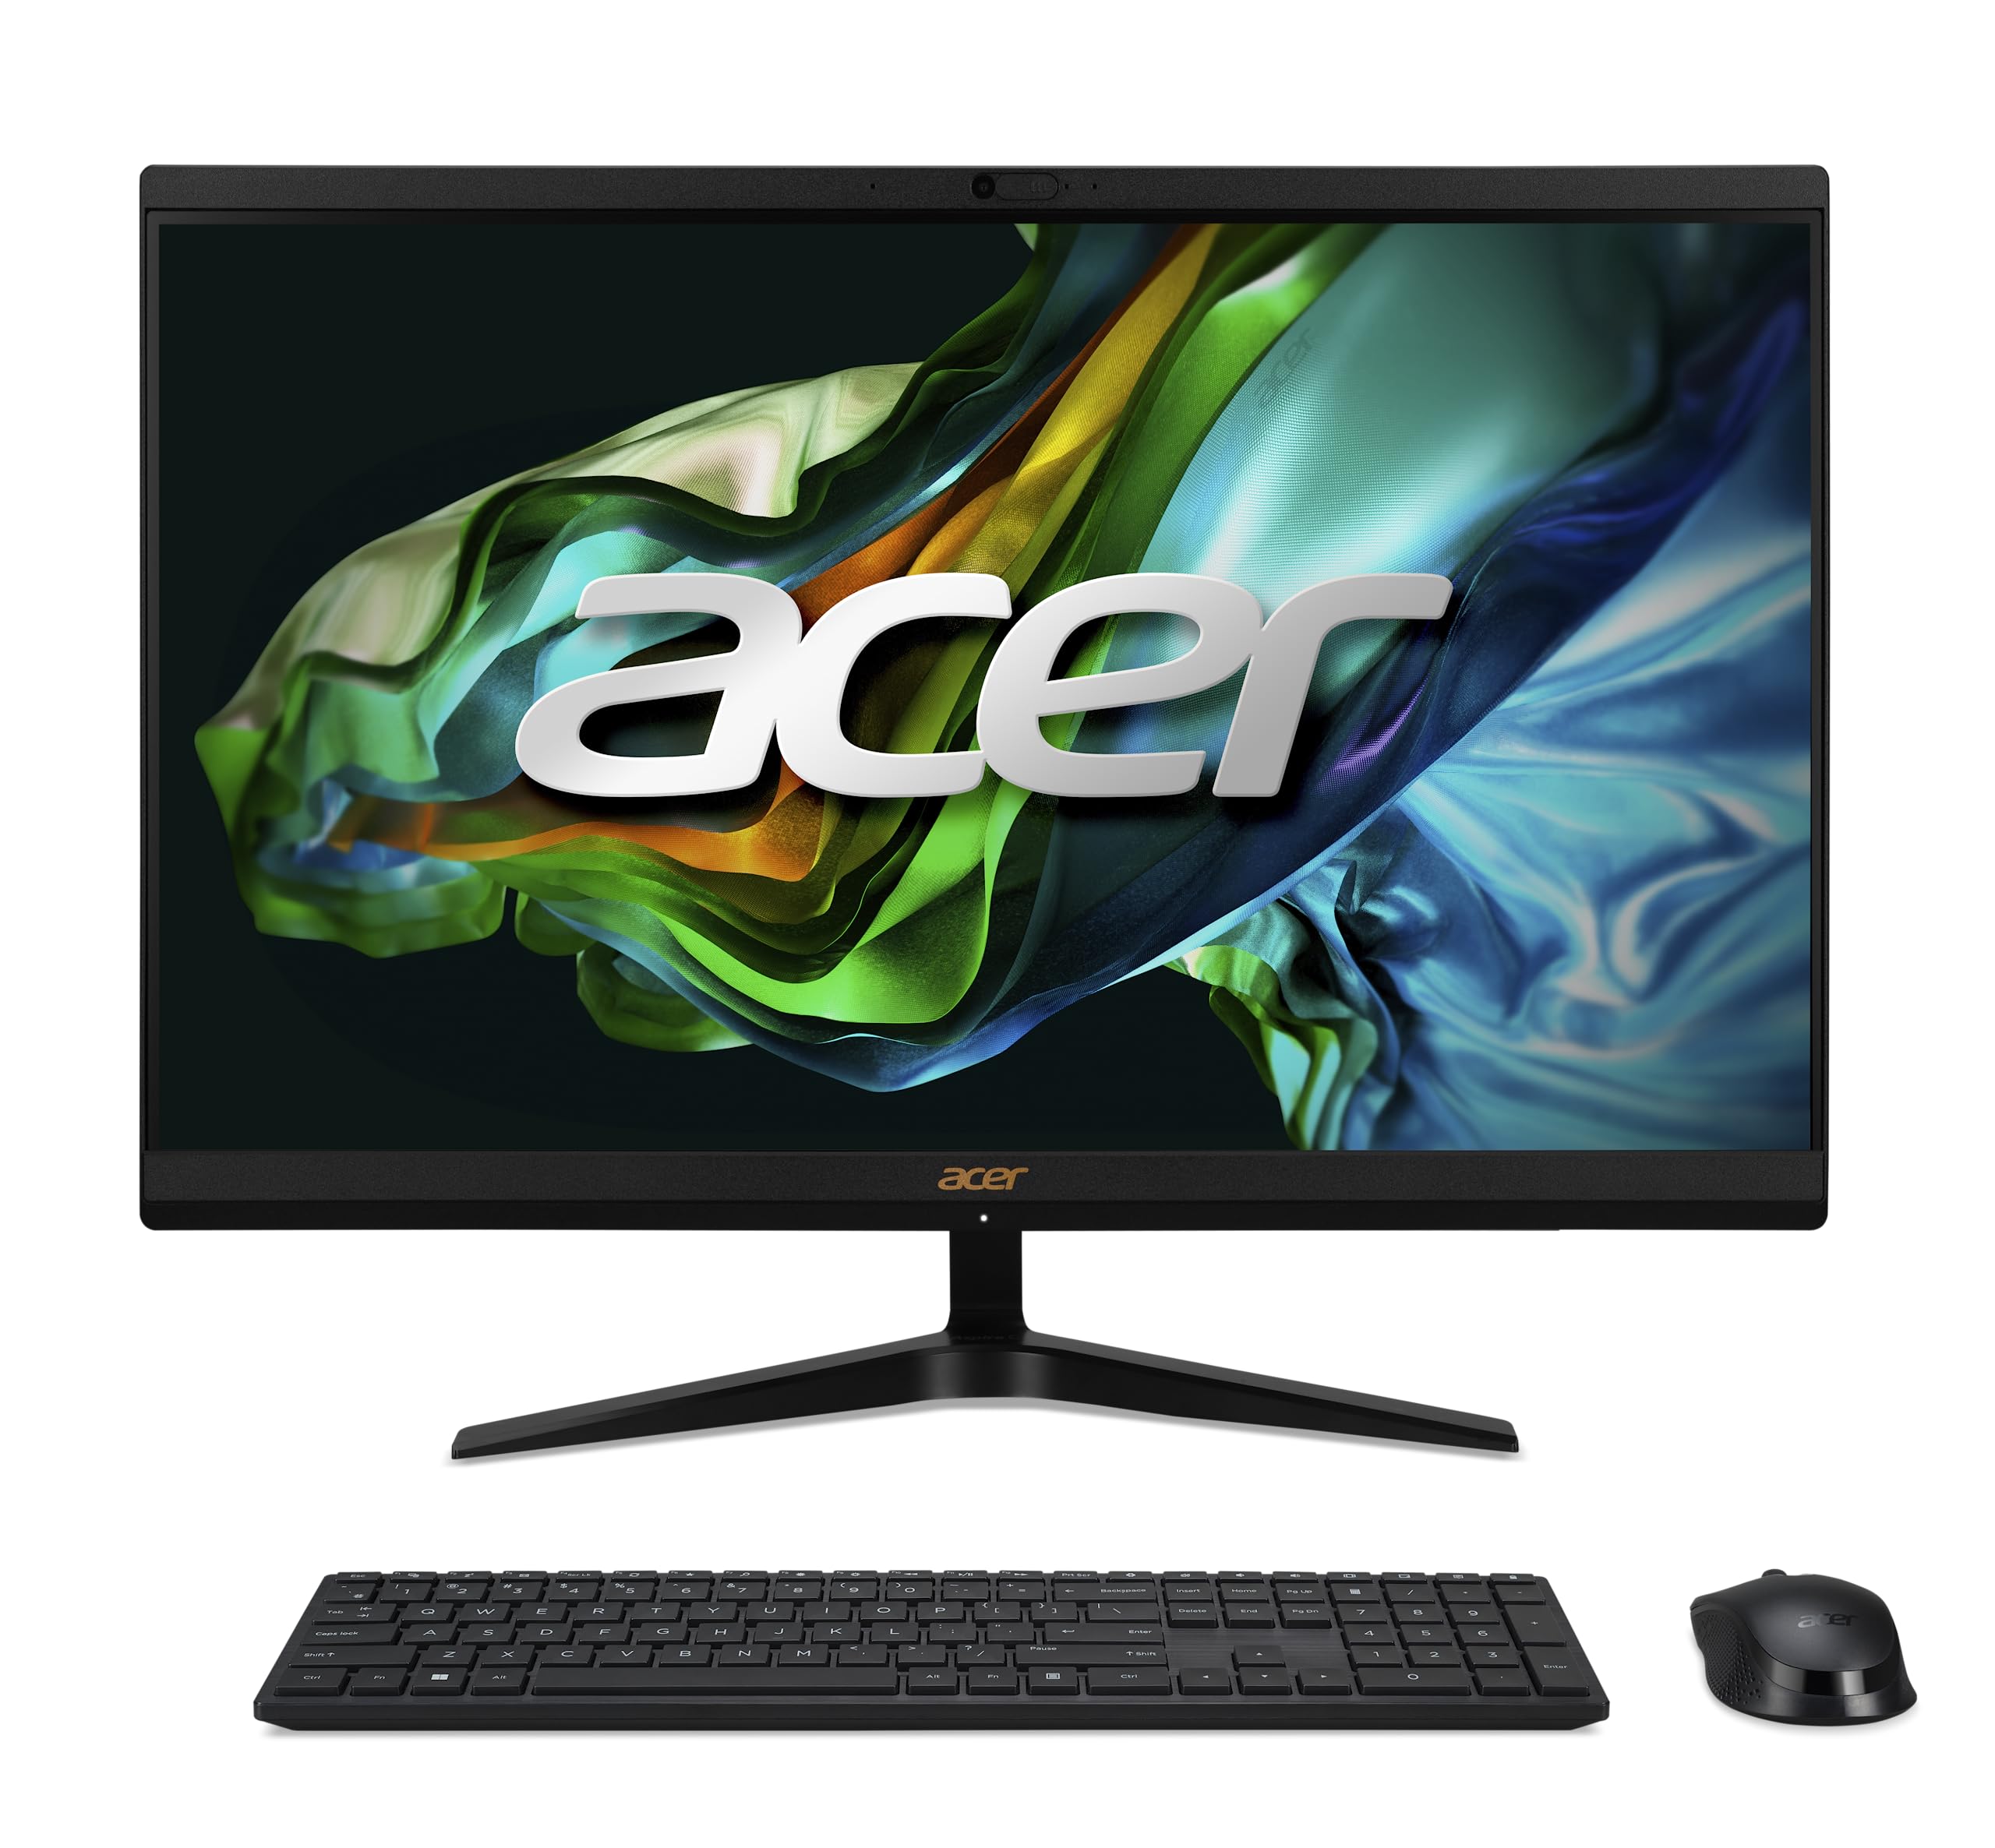 Acer C24-1800 All-in-One PC 13th Gen Intel Core i3-1305U 5 Cores Upto 4.50GHz/8GB DDR4-256GB SSD-Intel UHD Graphics/23.8" FHD Wide View Angle Monitor/WiFi-6/Win 11 + Wireless Keyboard,Mouse